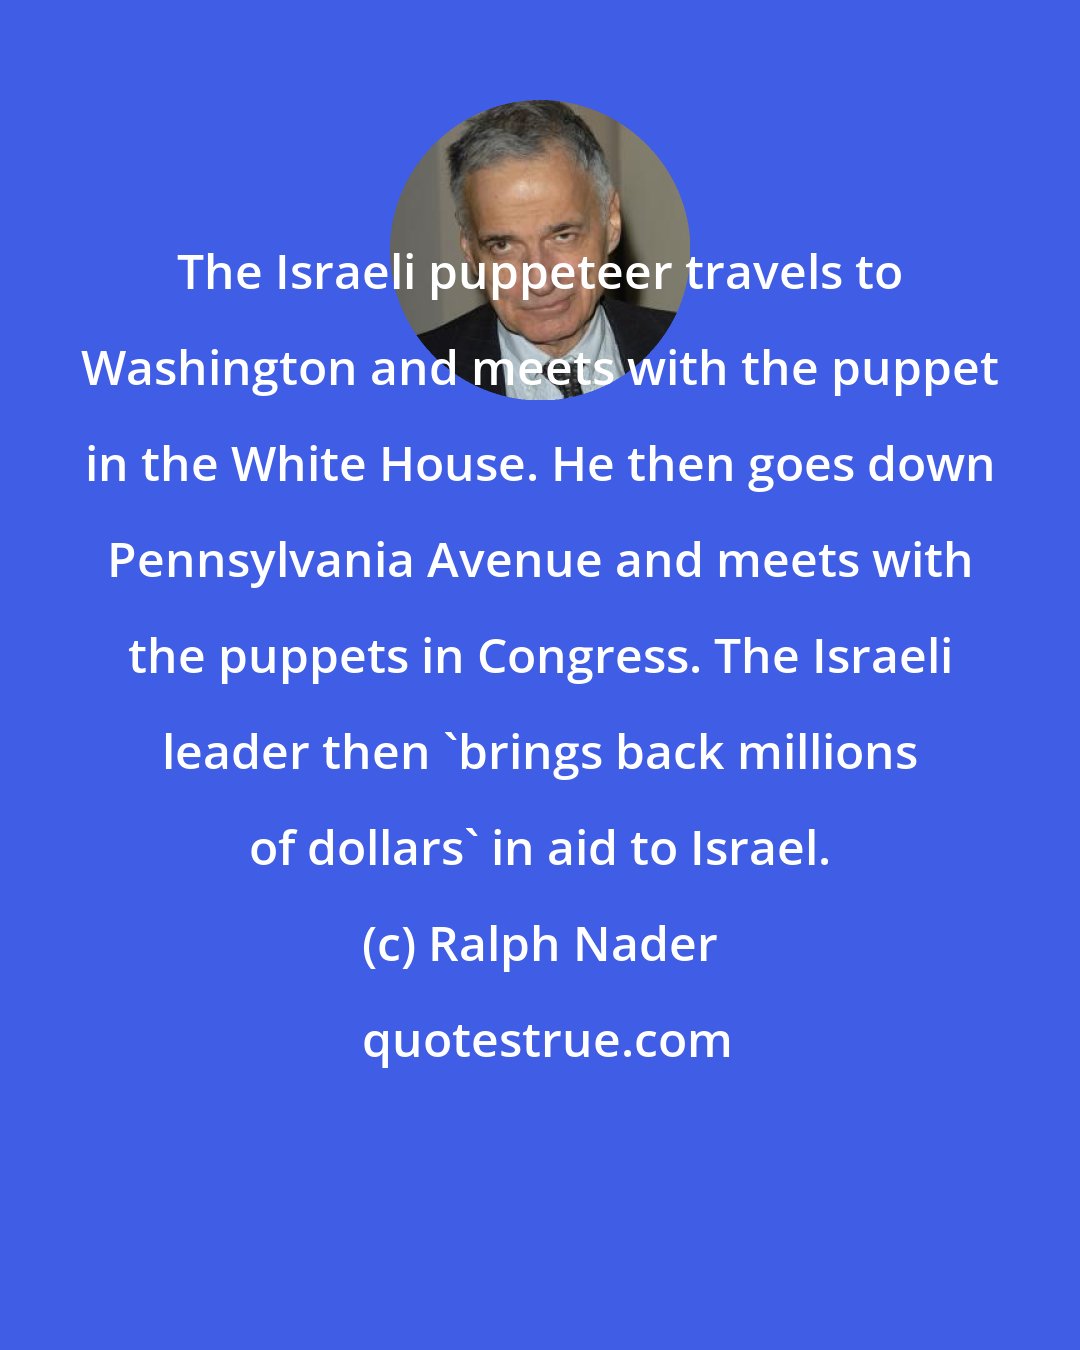 Ralph Nader: The Israeli puppeteer travels to Washington and meets with the puppet in the White House. He then goes down Pennsylvania Avenue and meets with the puppets in Congress. The Israeli leader then 'brings back millions of dollars' in aid to Israel.